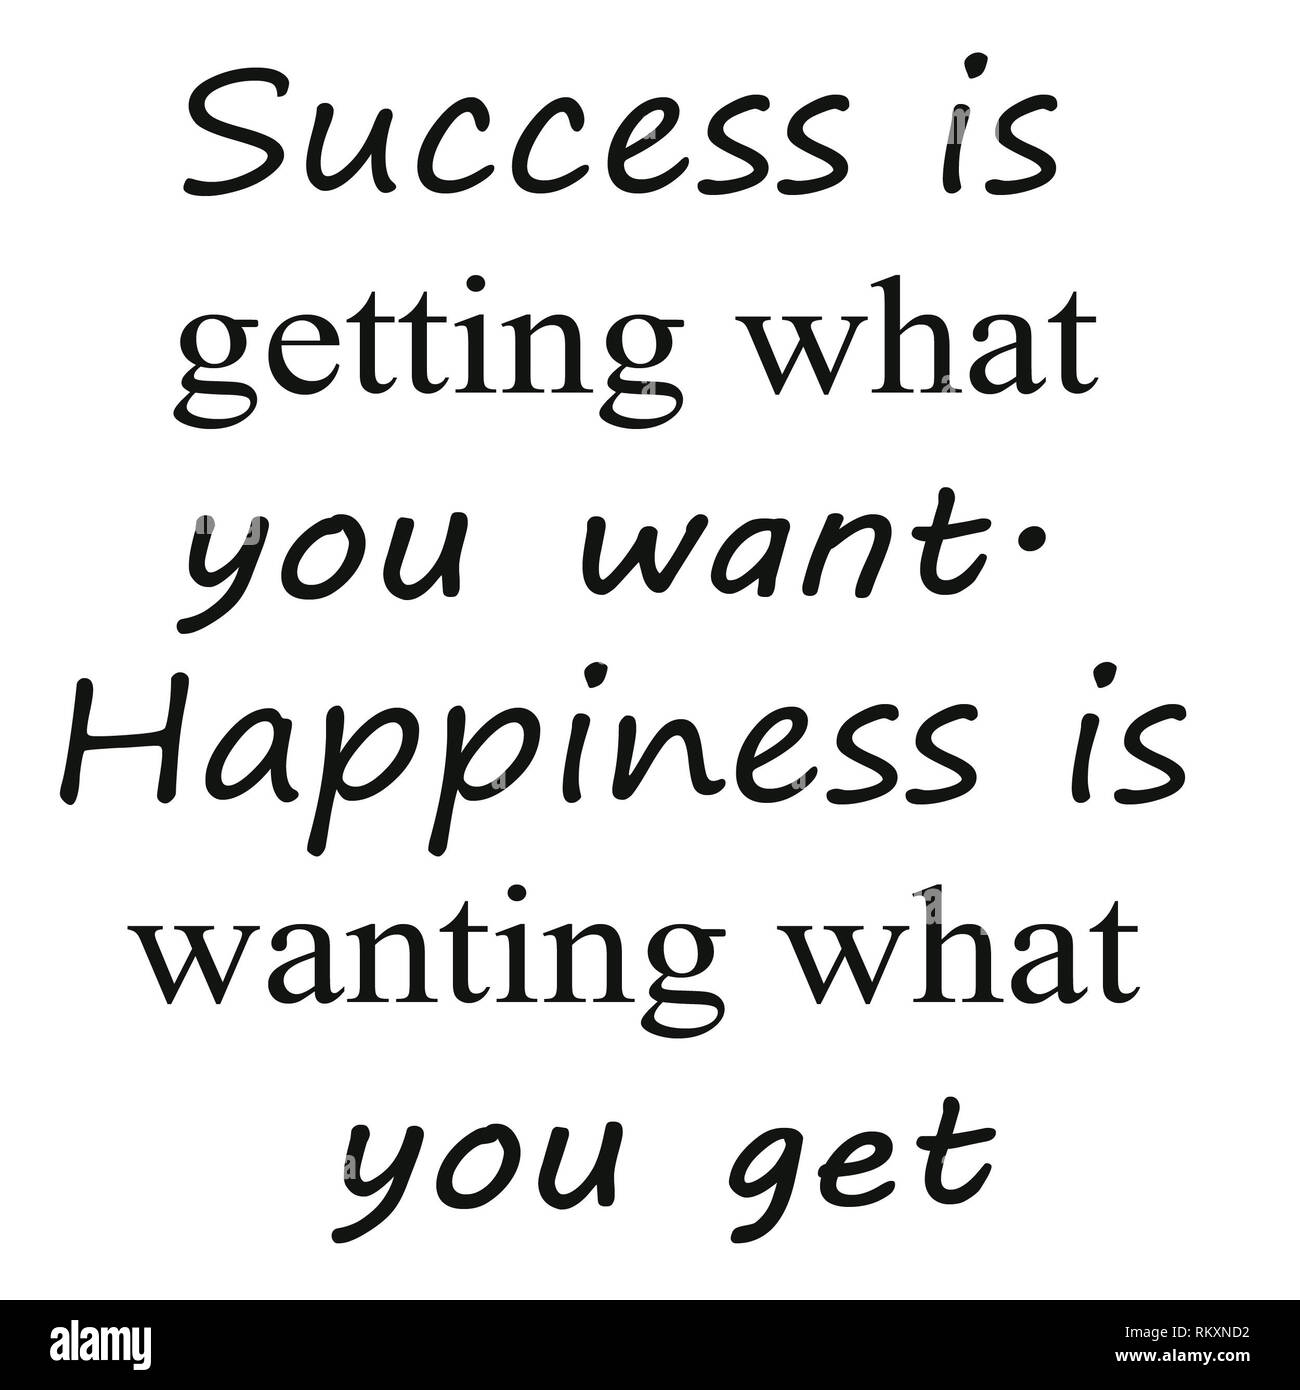 Quotes of happiness and success and words of wisdom Stock Photo